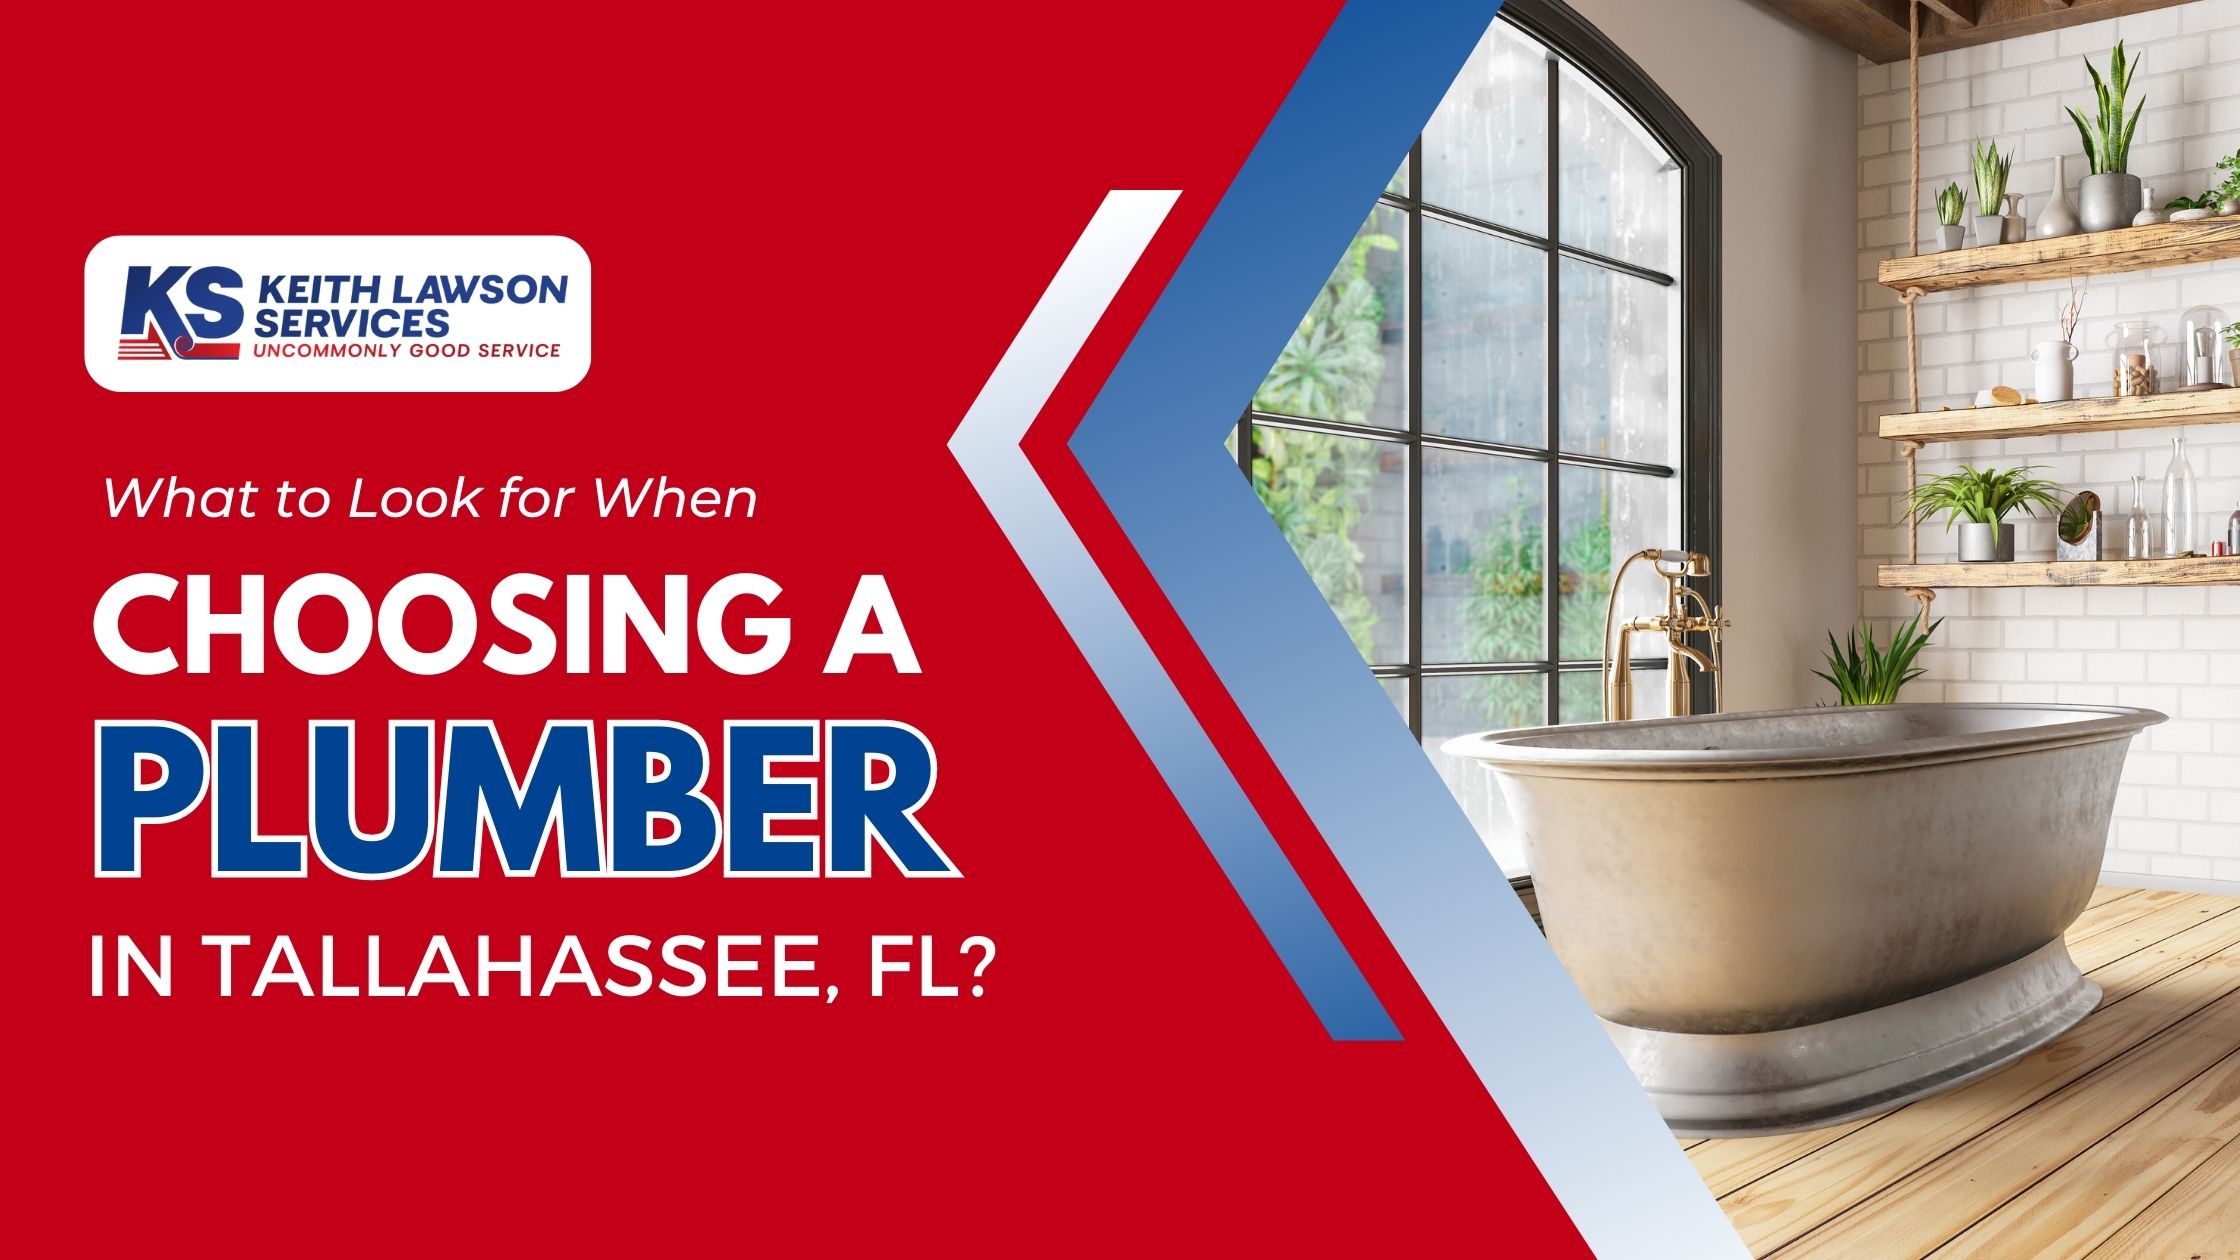 What to Look for When Choosing A Plumber in the Tallahassee Area?